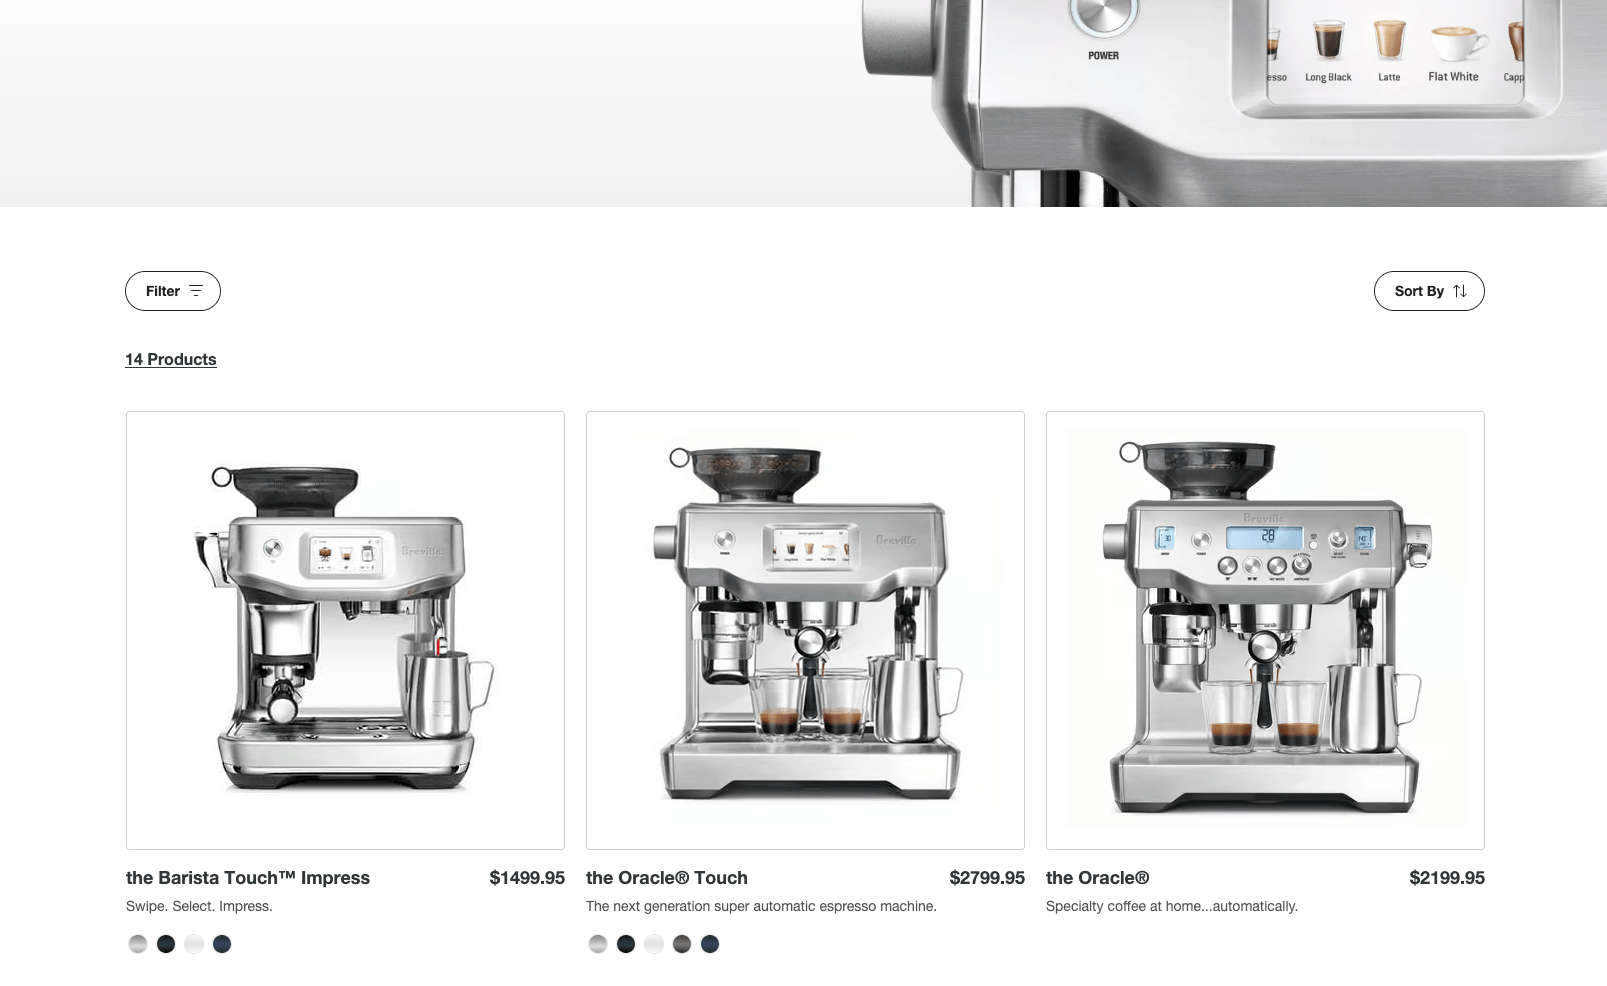 Breville homepage